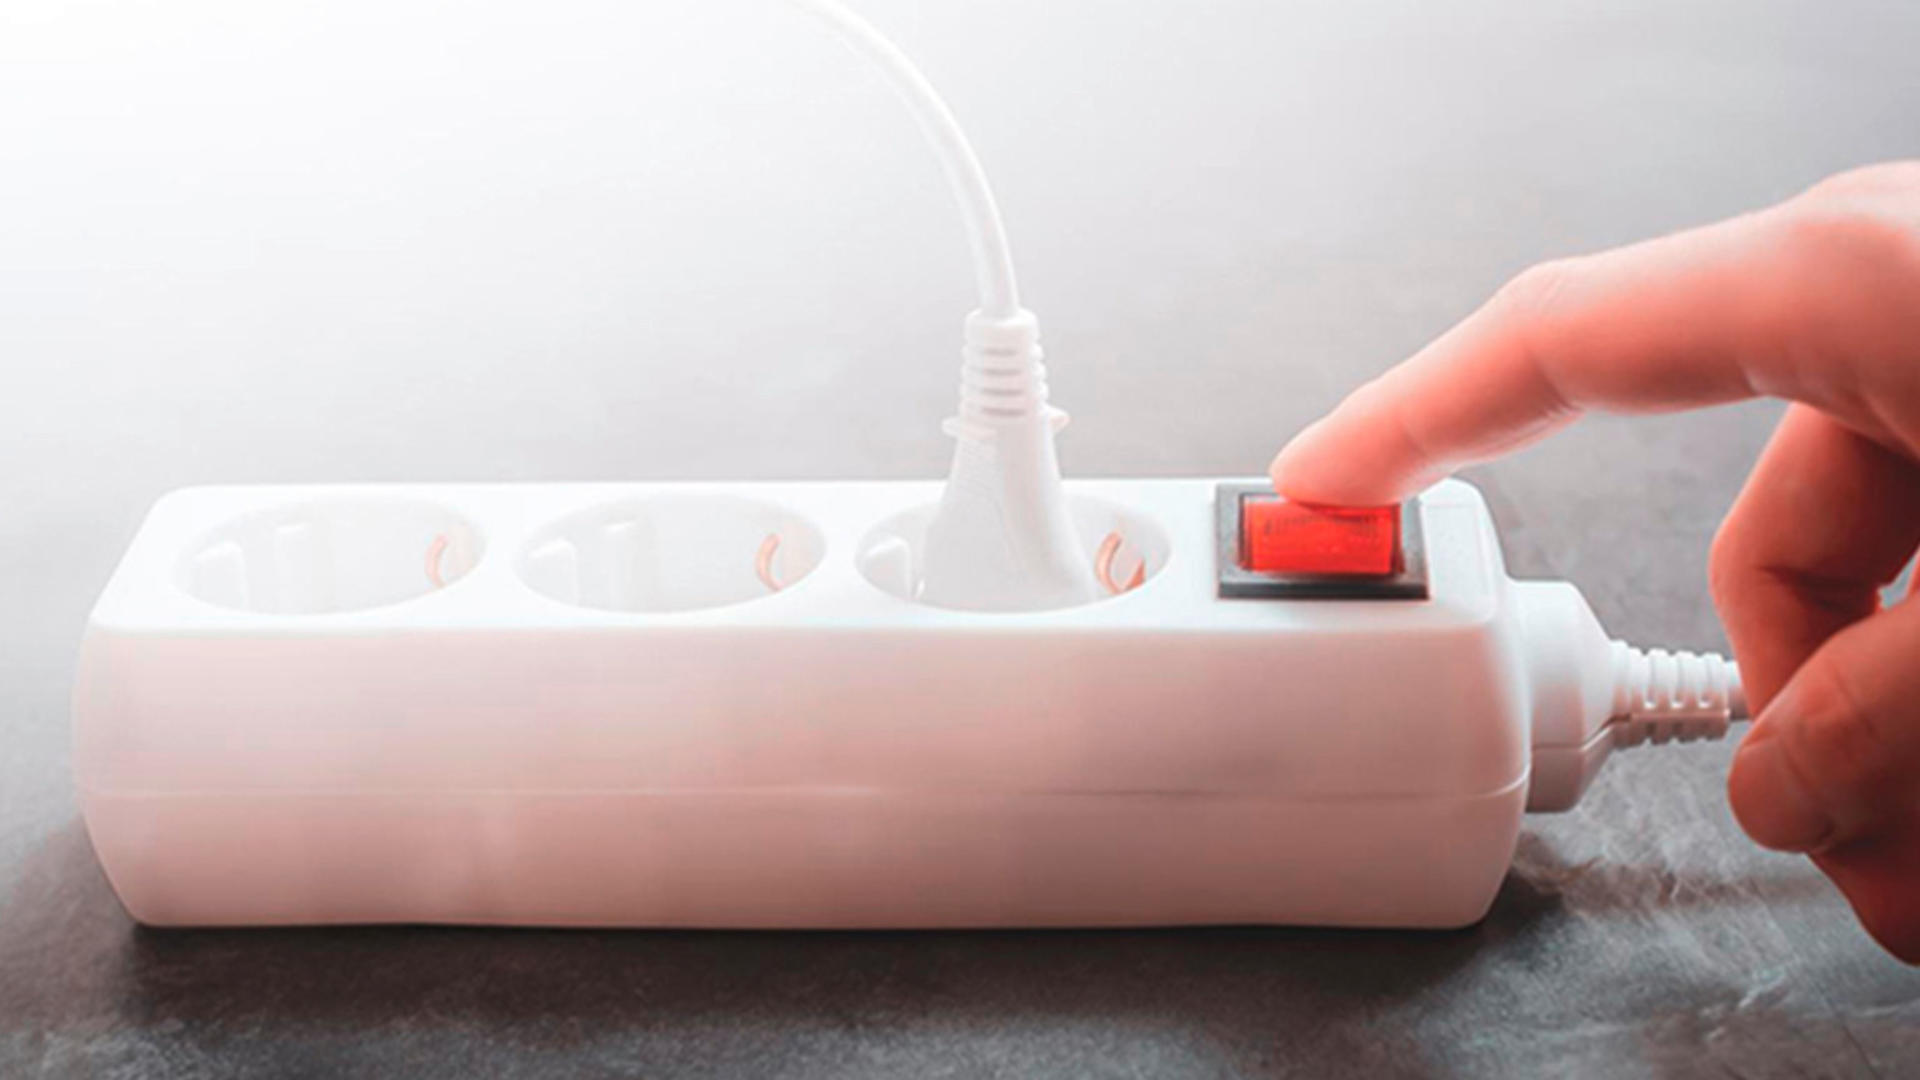 It’s easy to switch off a power strip.